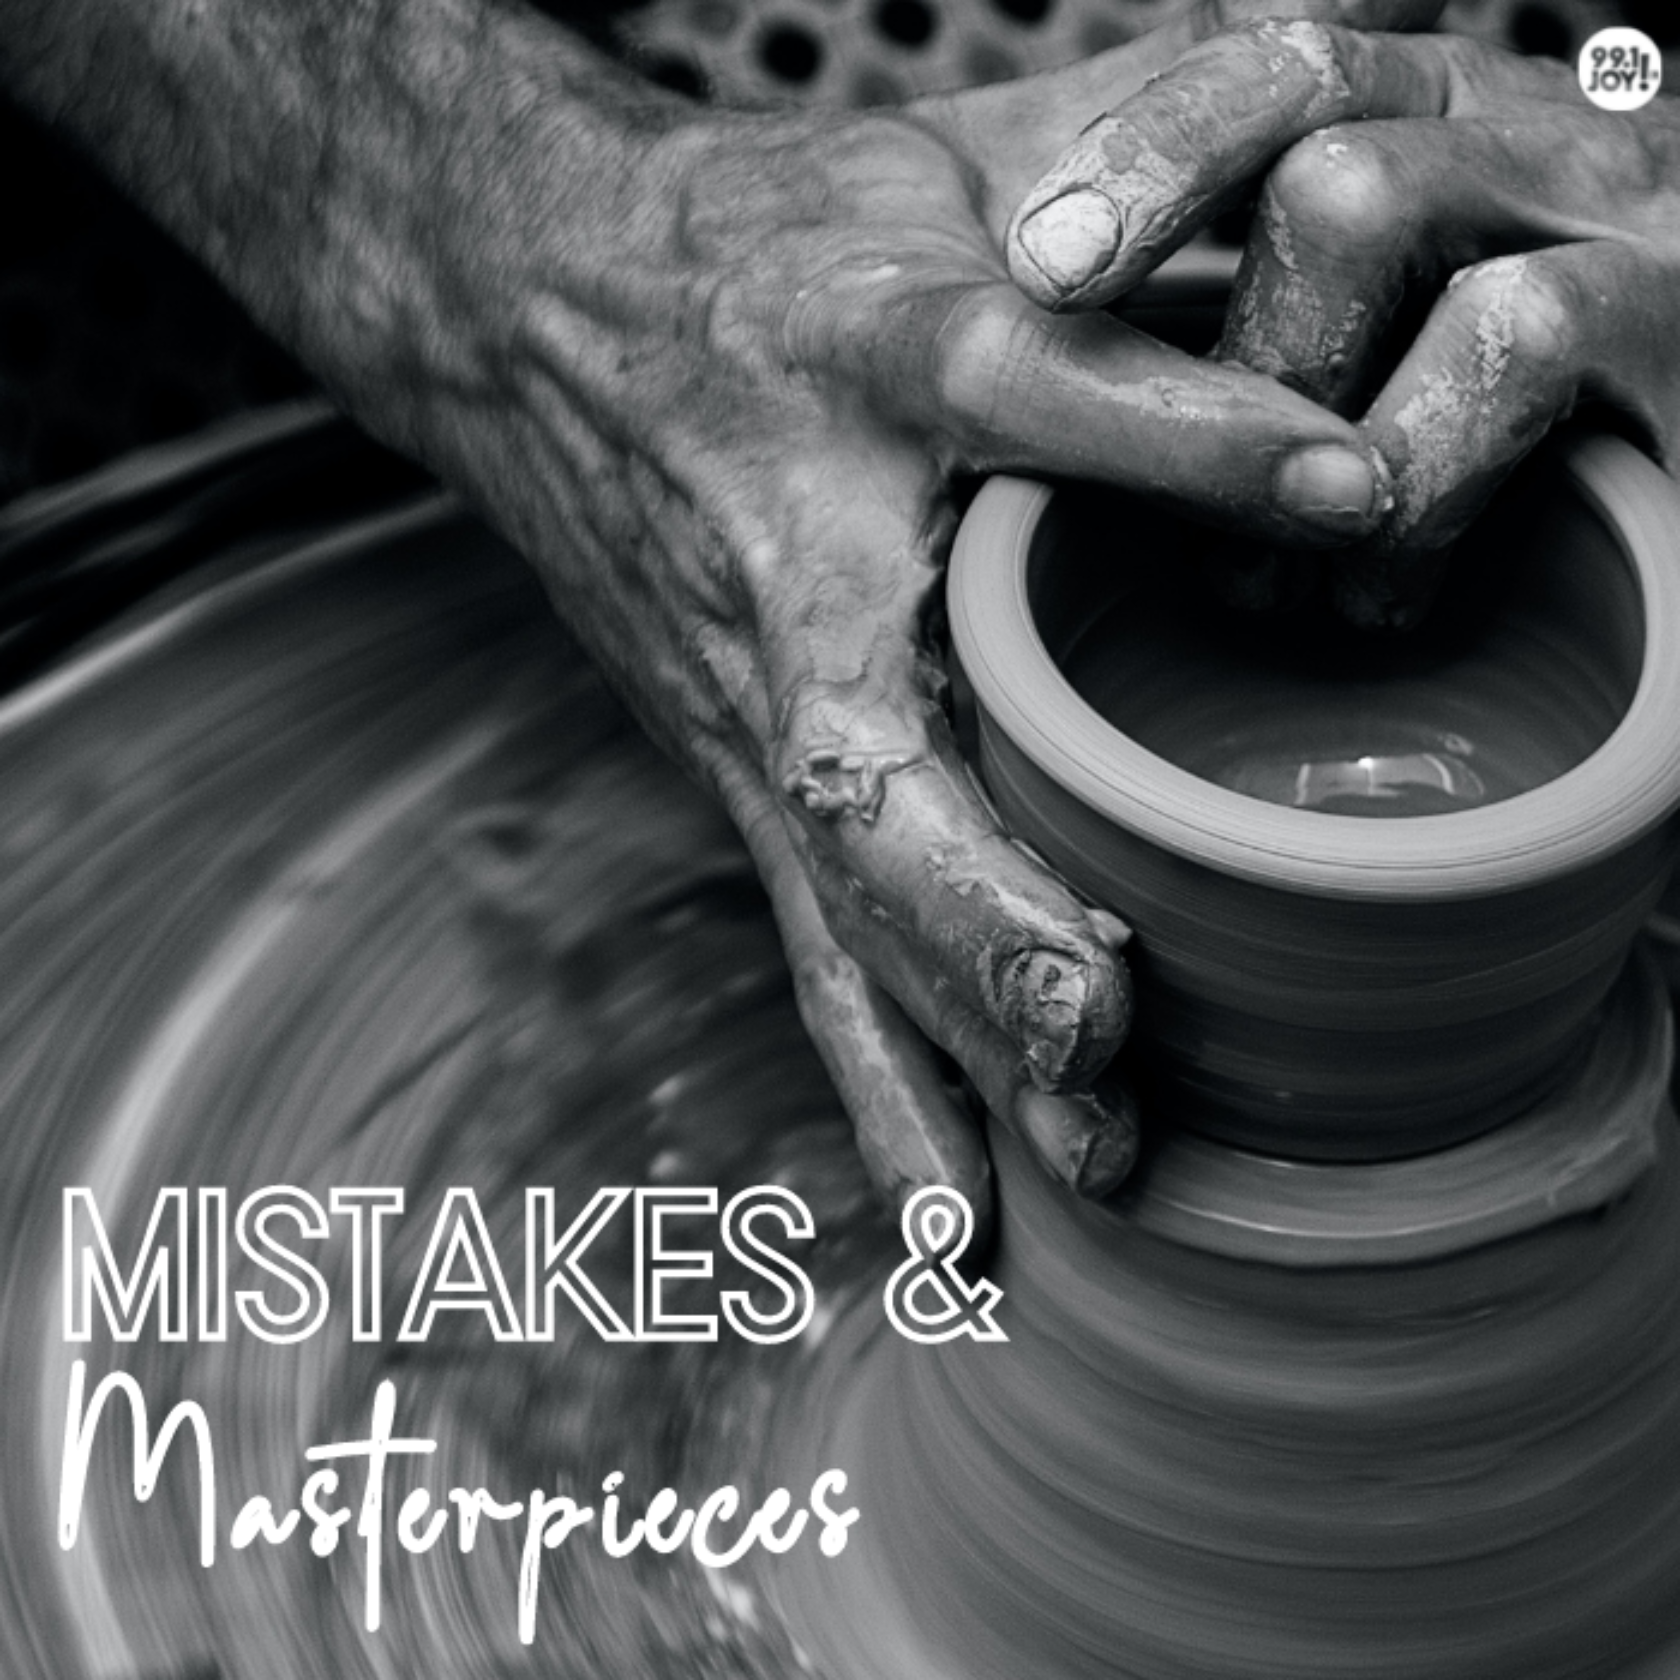 Mistakes & Masterpieces